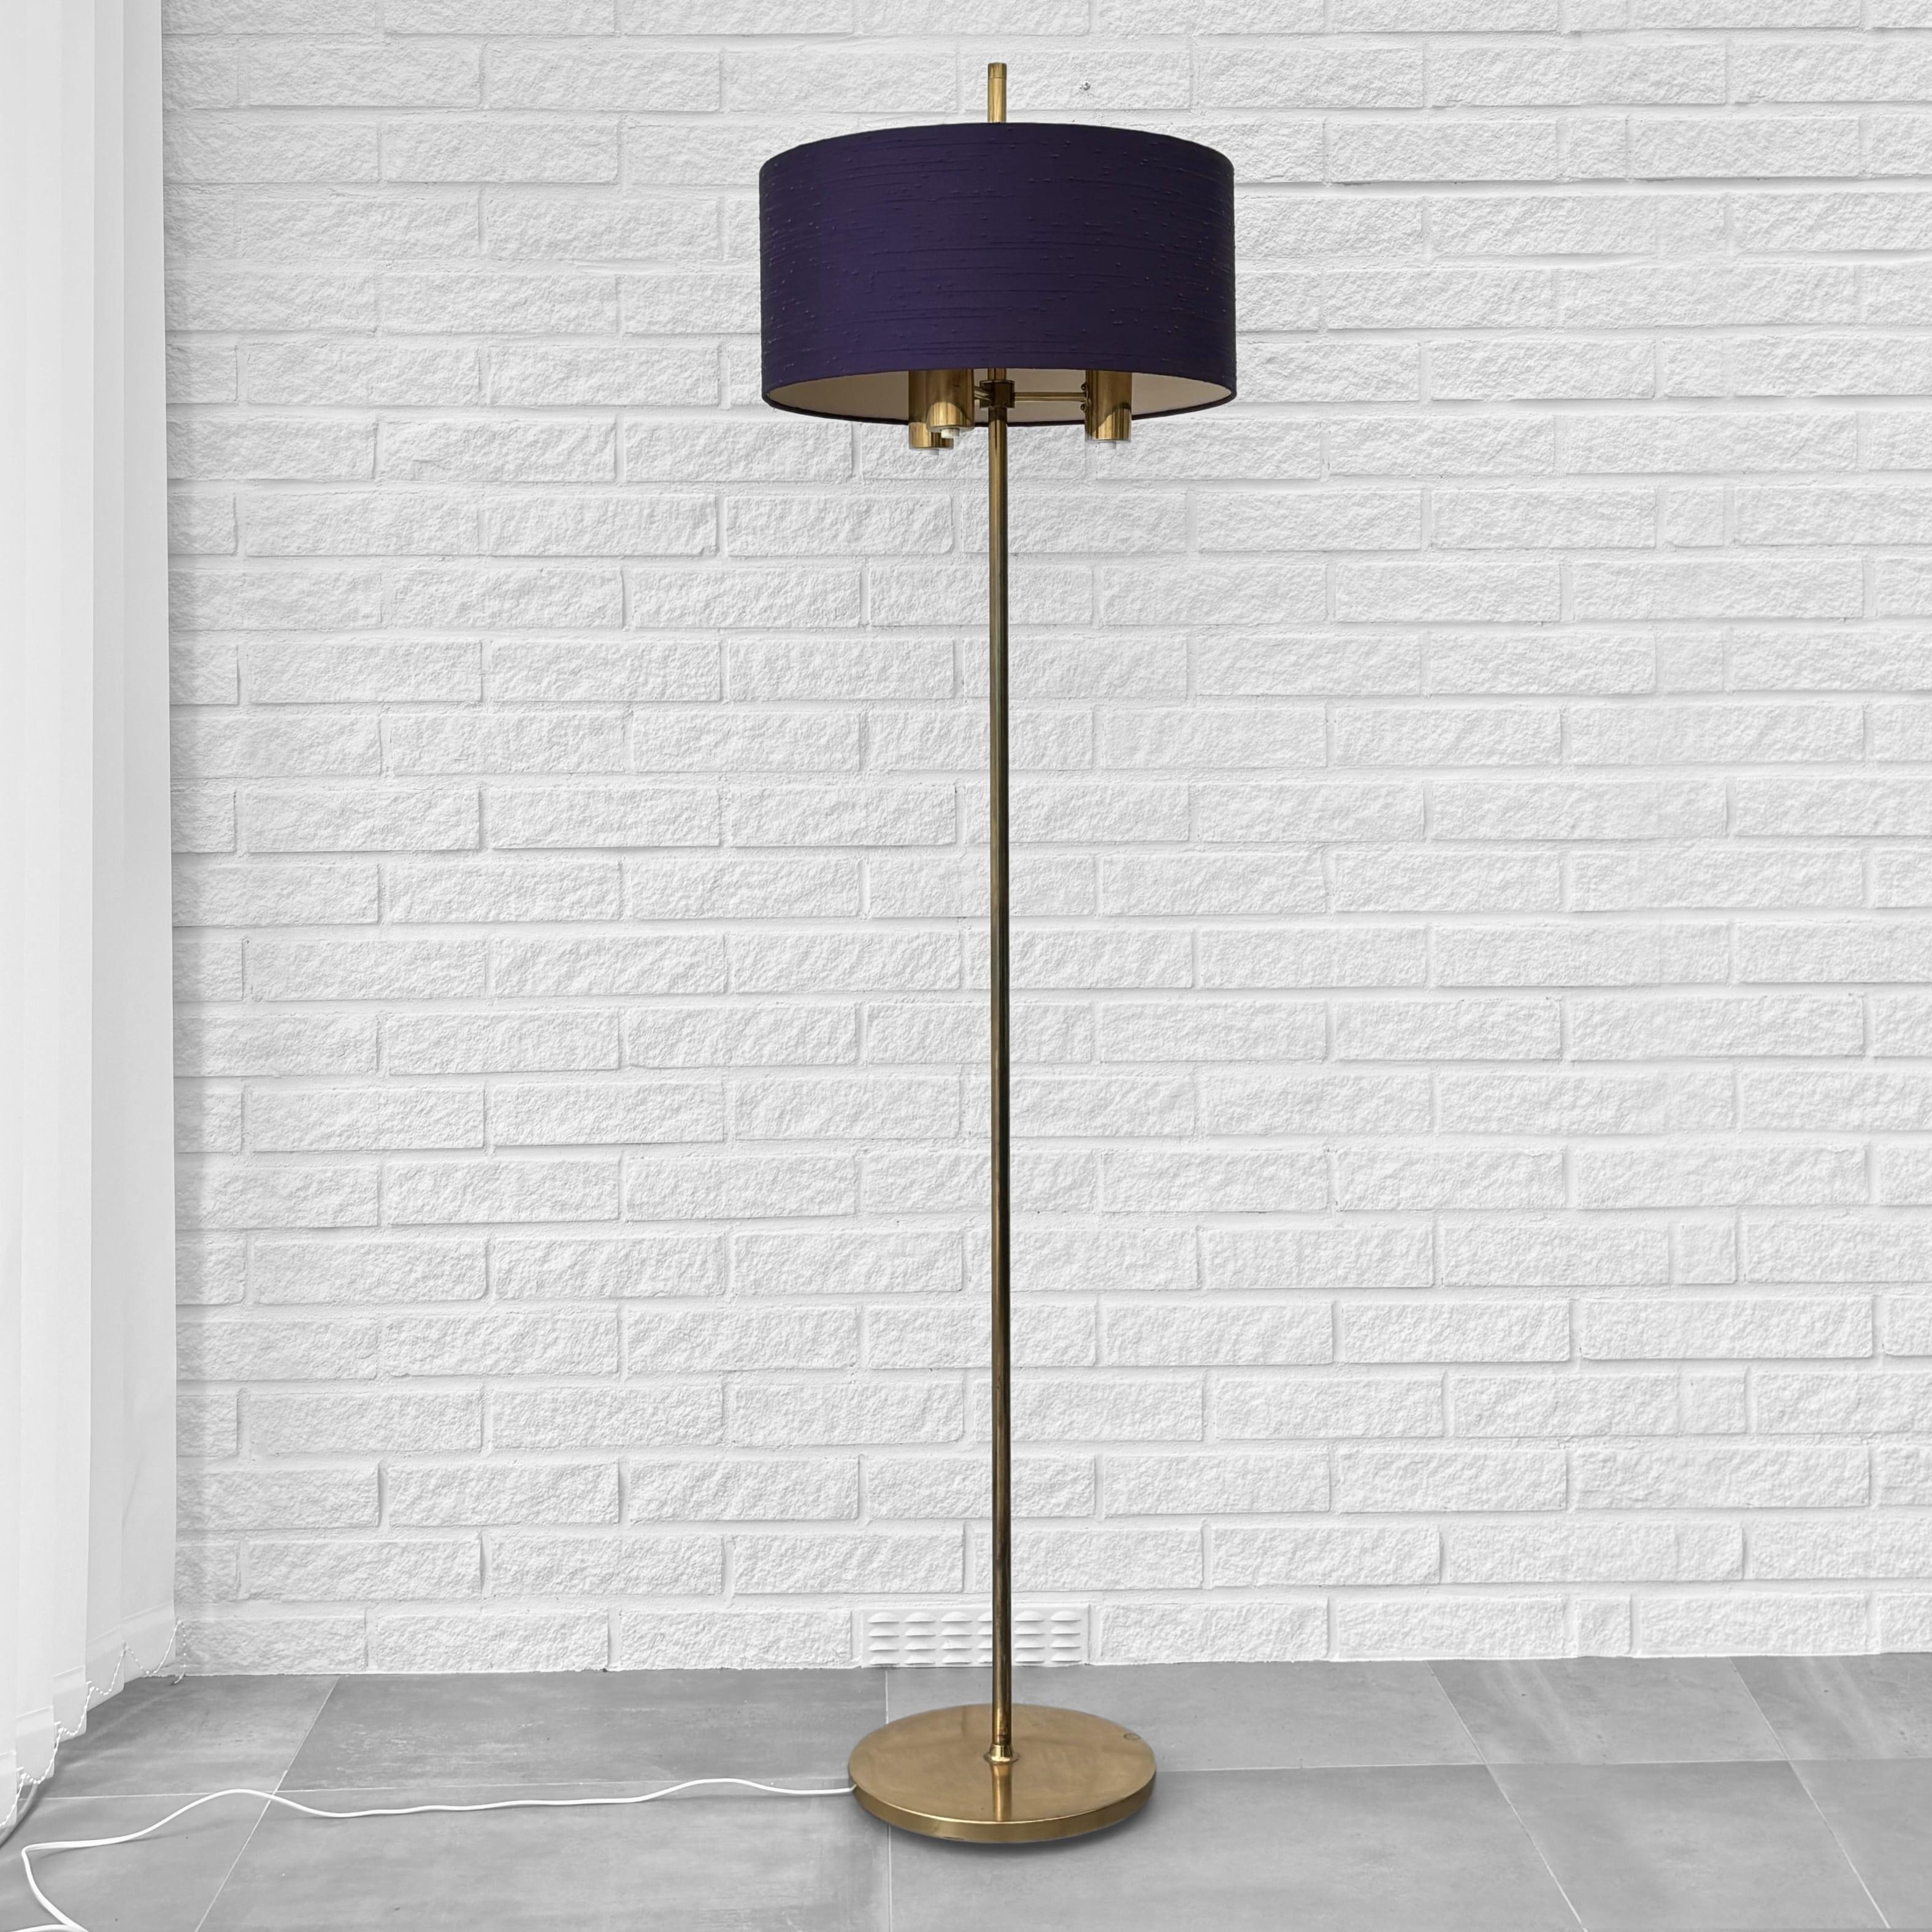 A rare Swedish mid-century floor lamp produced by the manufacturer Fagerhults Belysning in the 1960s. Made from brass with three lamp holders and a beautiful cylindrical shade upholstered in original purple textile. Each arm has an individual light